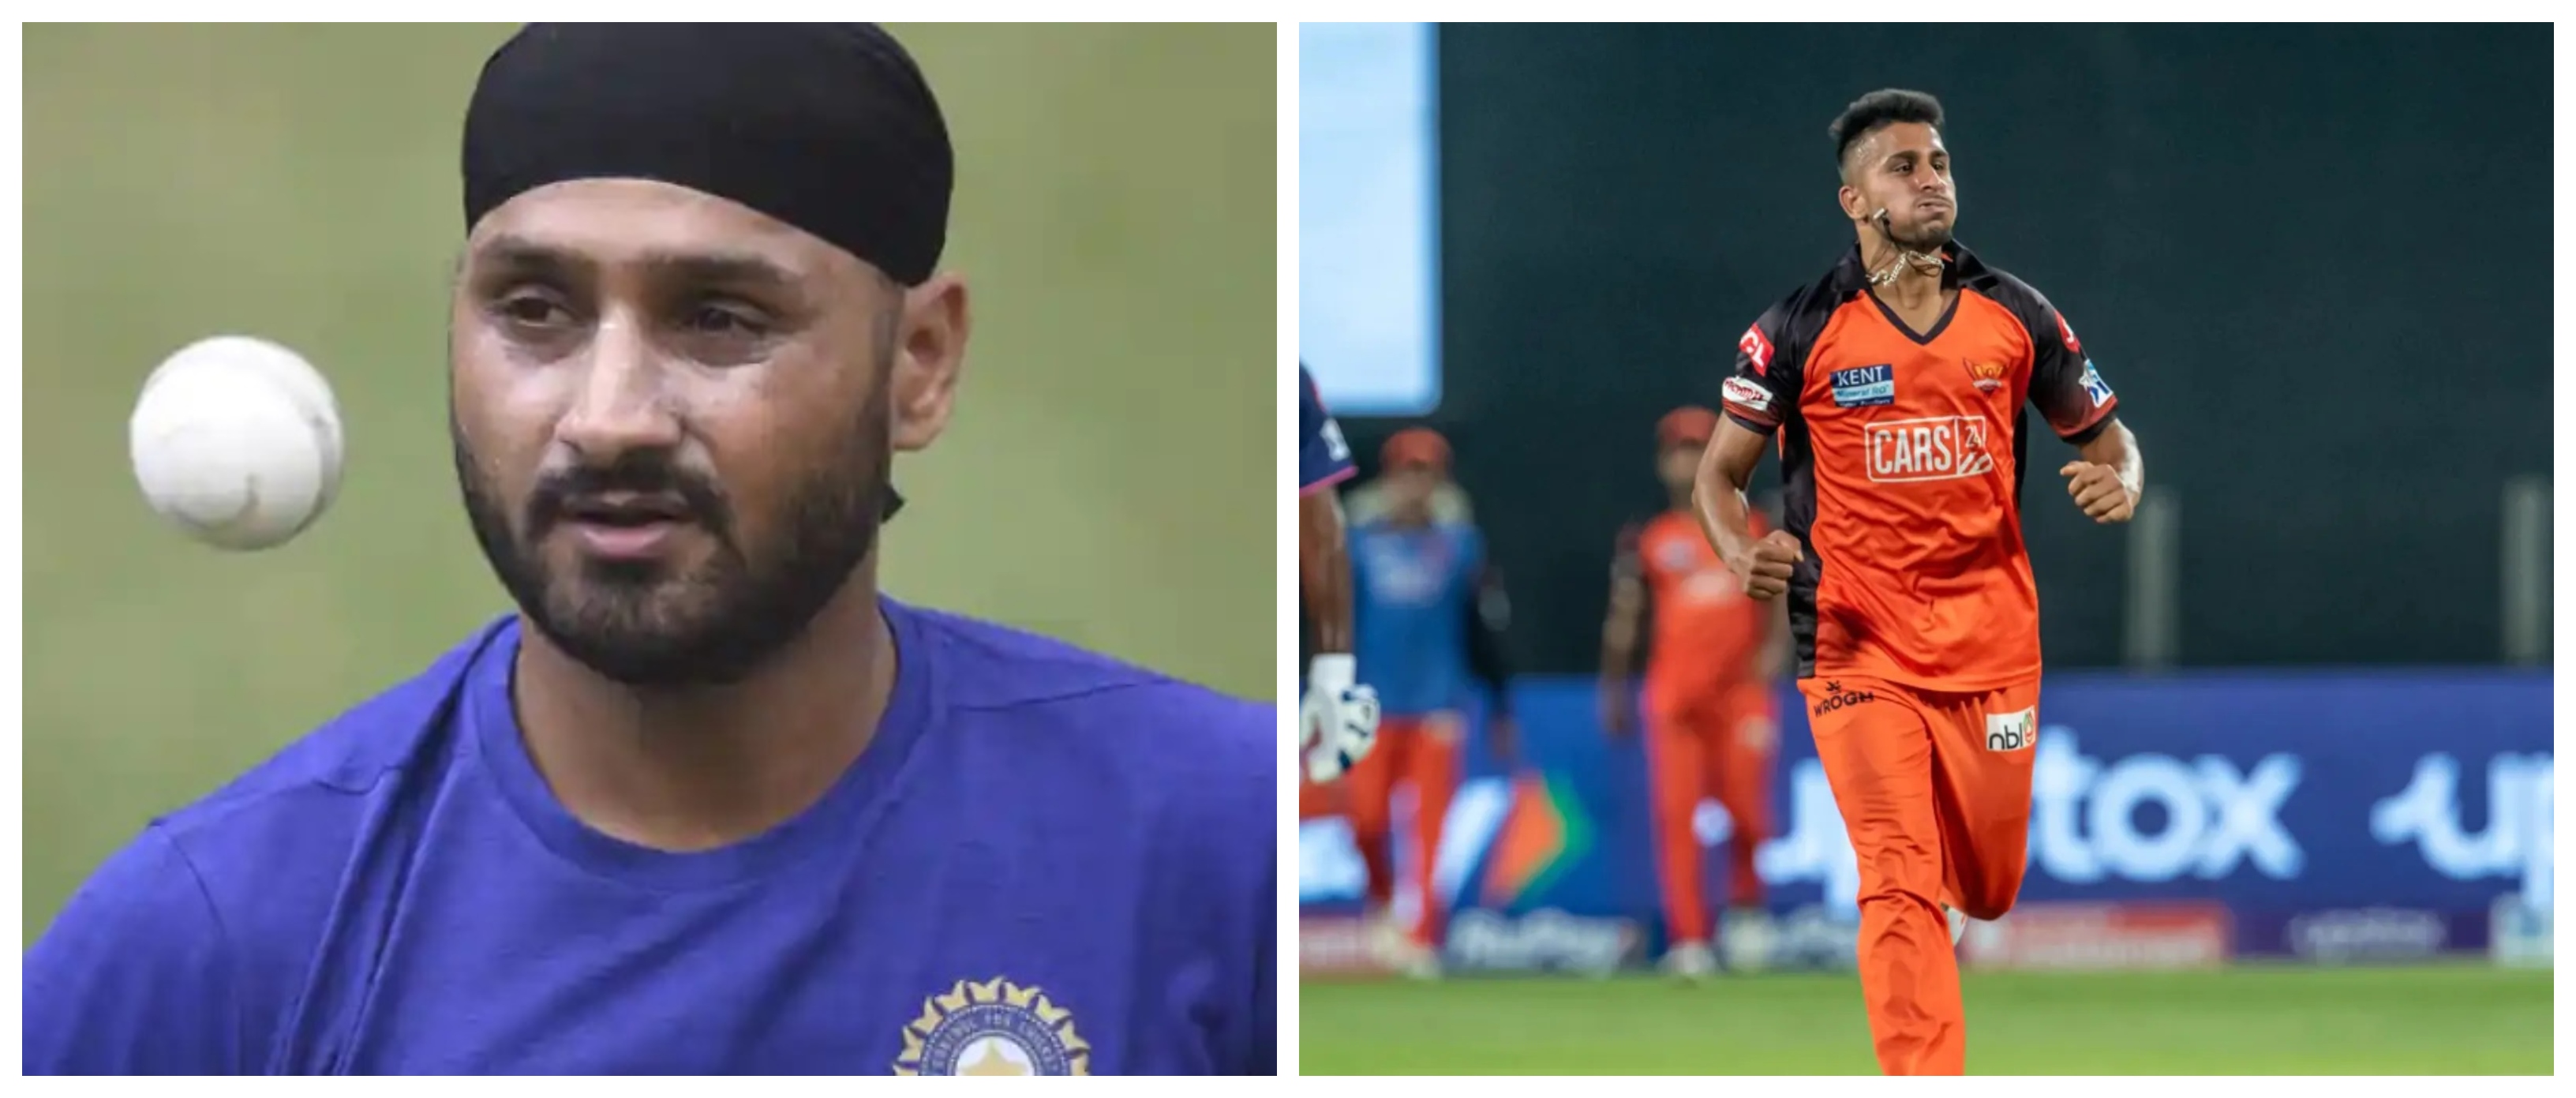 IPL 2022: After Shahid Afridi, Harbhajan Singh urges Team India to fast track Umran Malik for T20 World Cup, says “he could be a match winner” In Australia